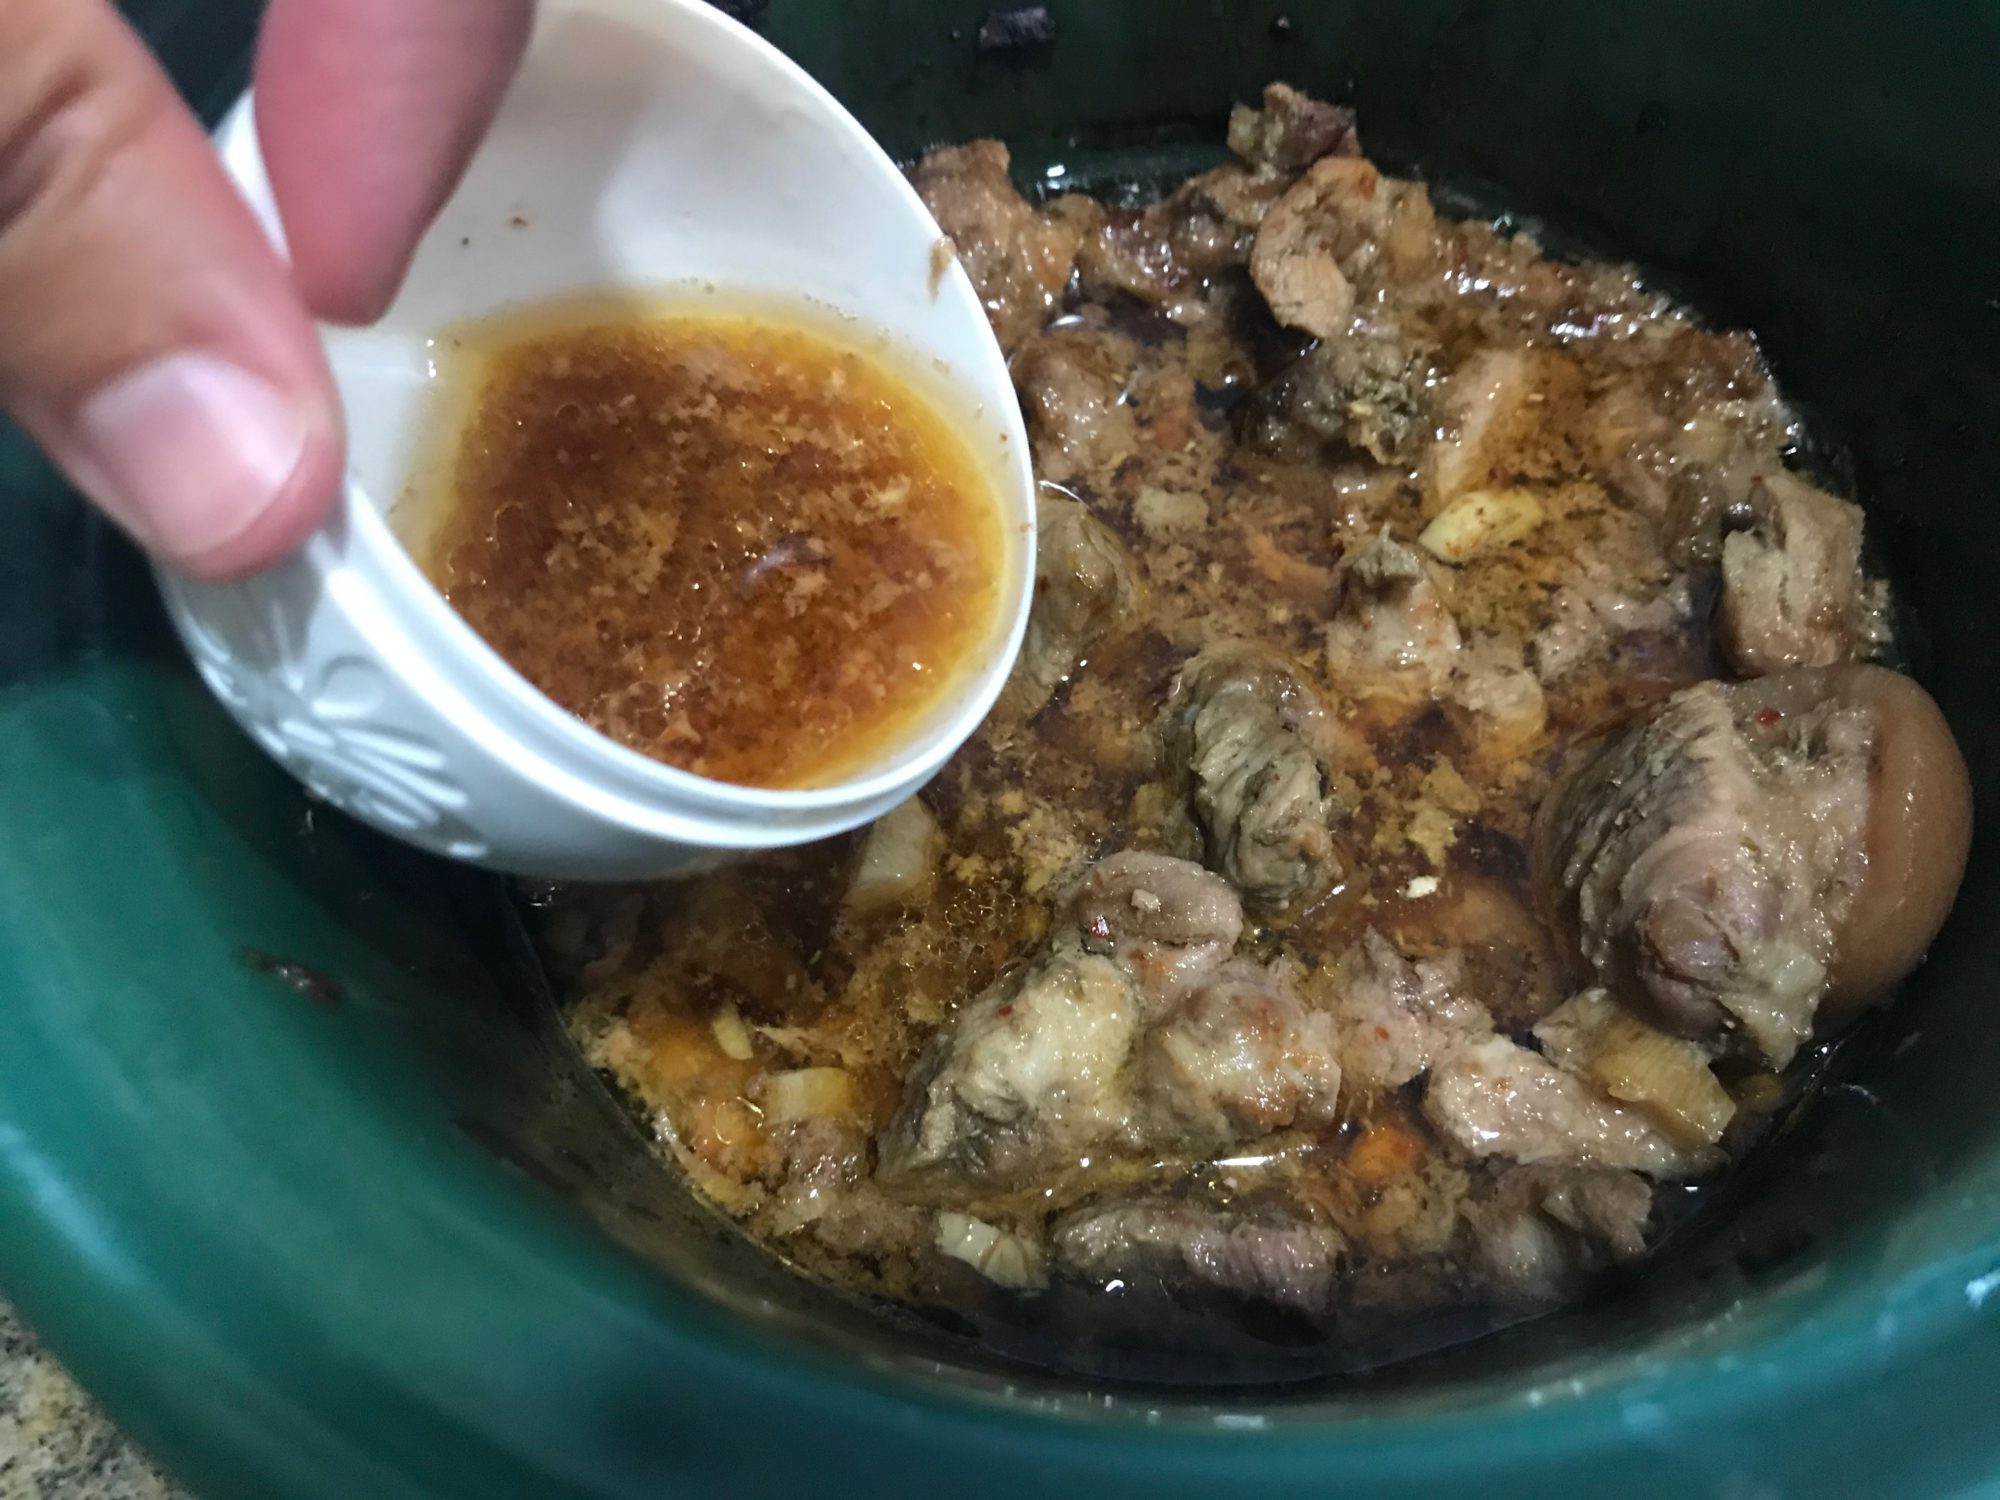 taking liquid out of the cooked pork to add to the rice